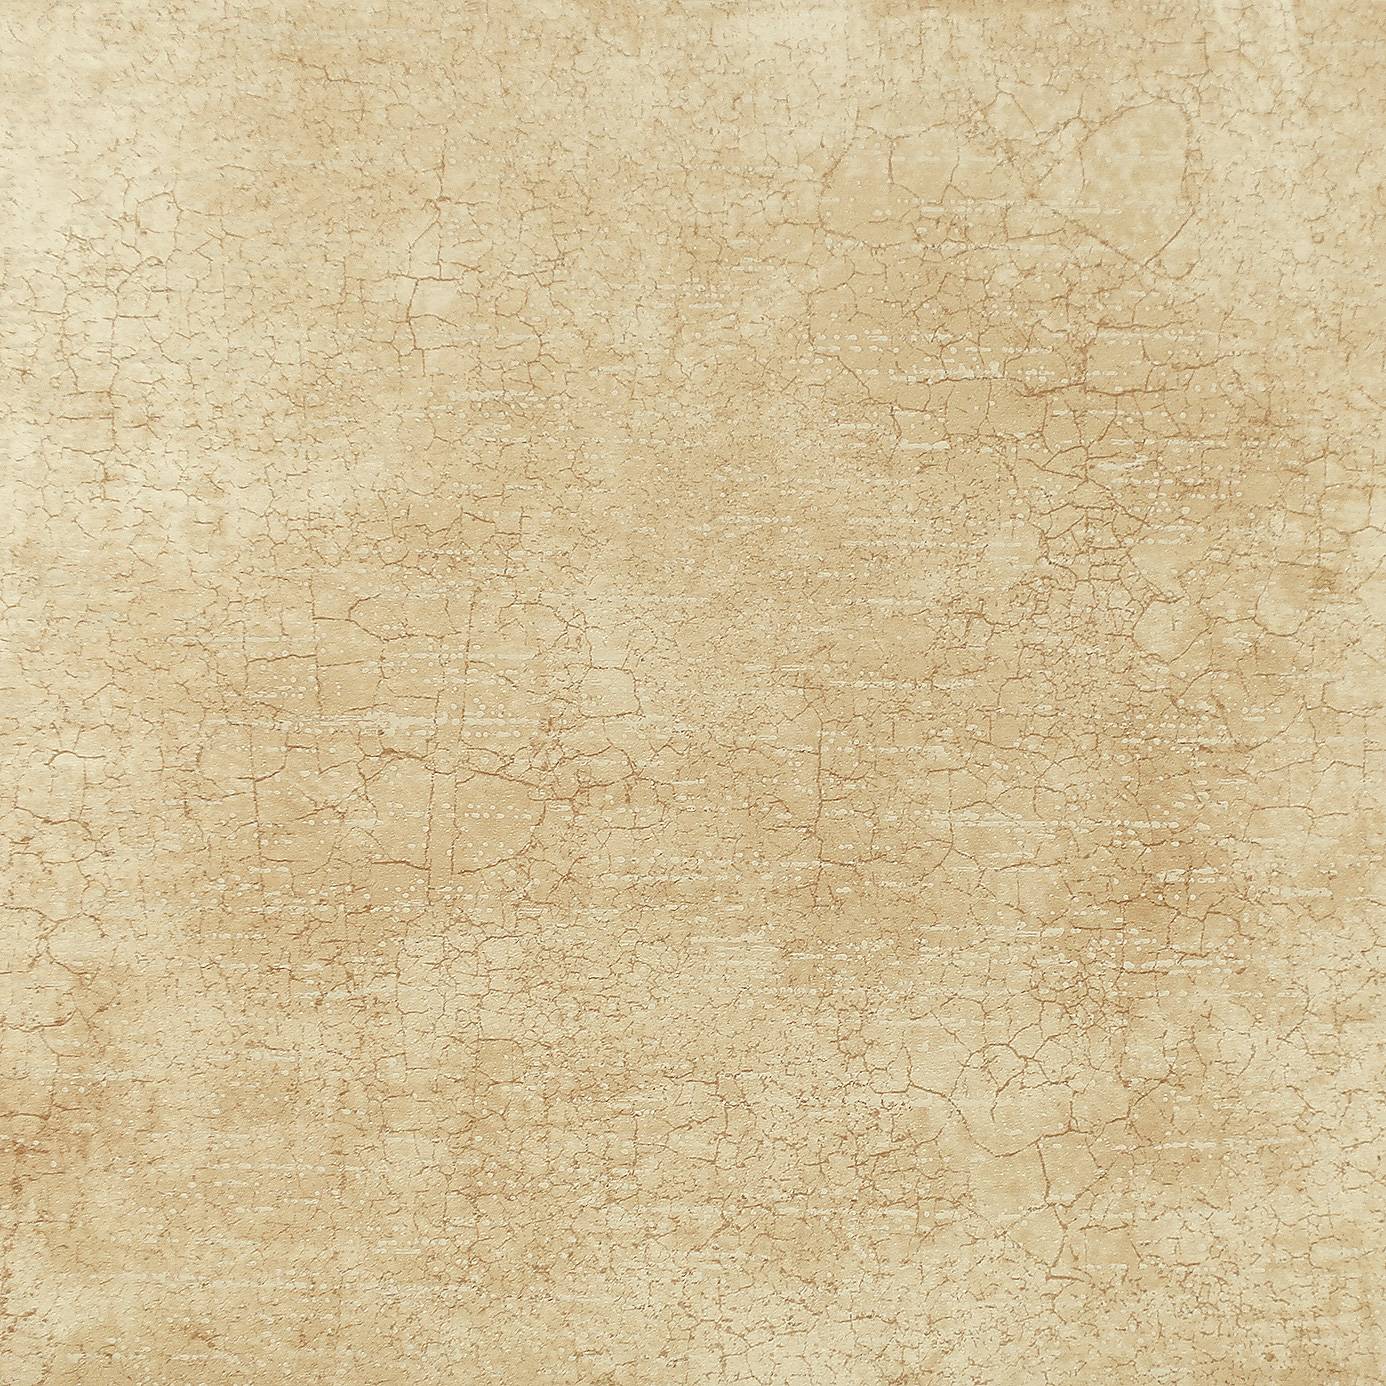 Coating Wallpaper - Putty (COATING39) - Wemyss Textures Wallpapers ...